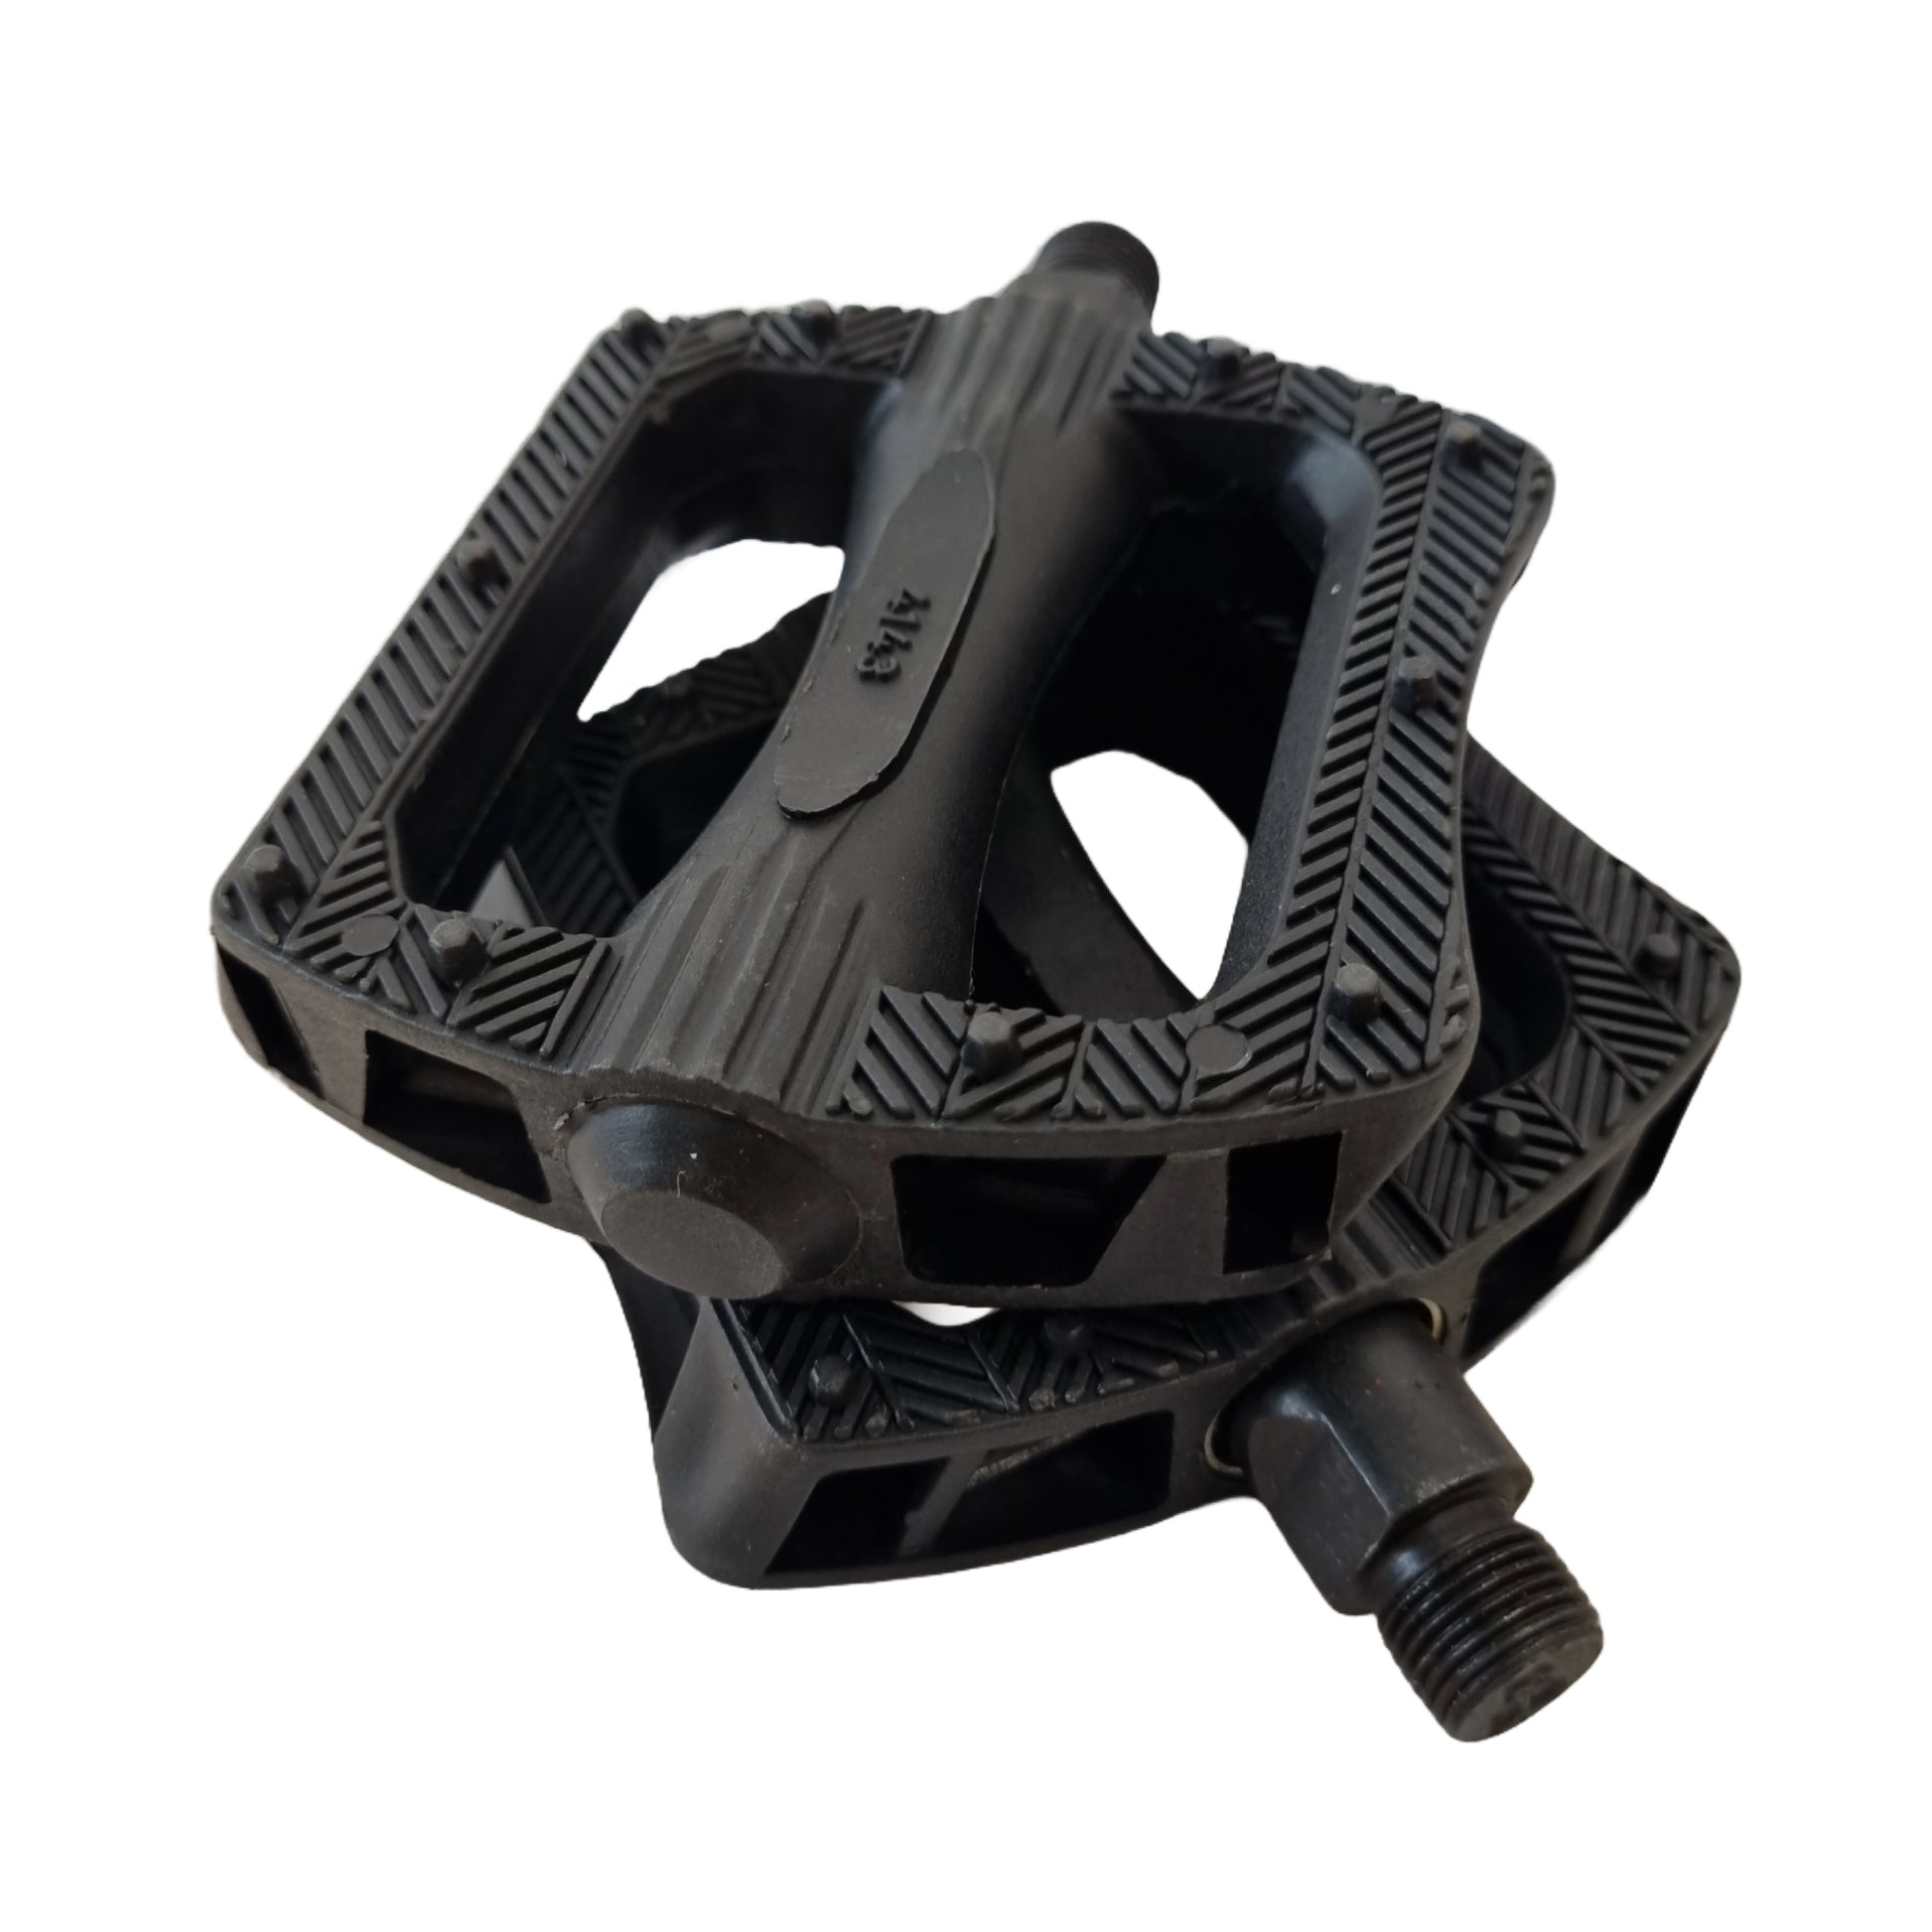 Buy online bicycle pedals for resin hybrid and mountain bike by omo bikes cycles under 200